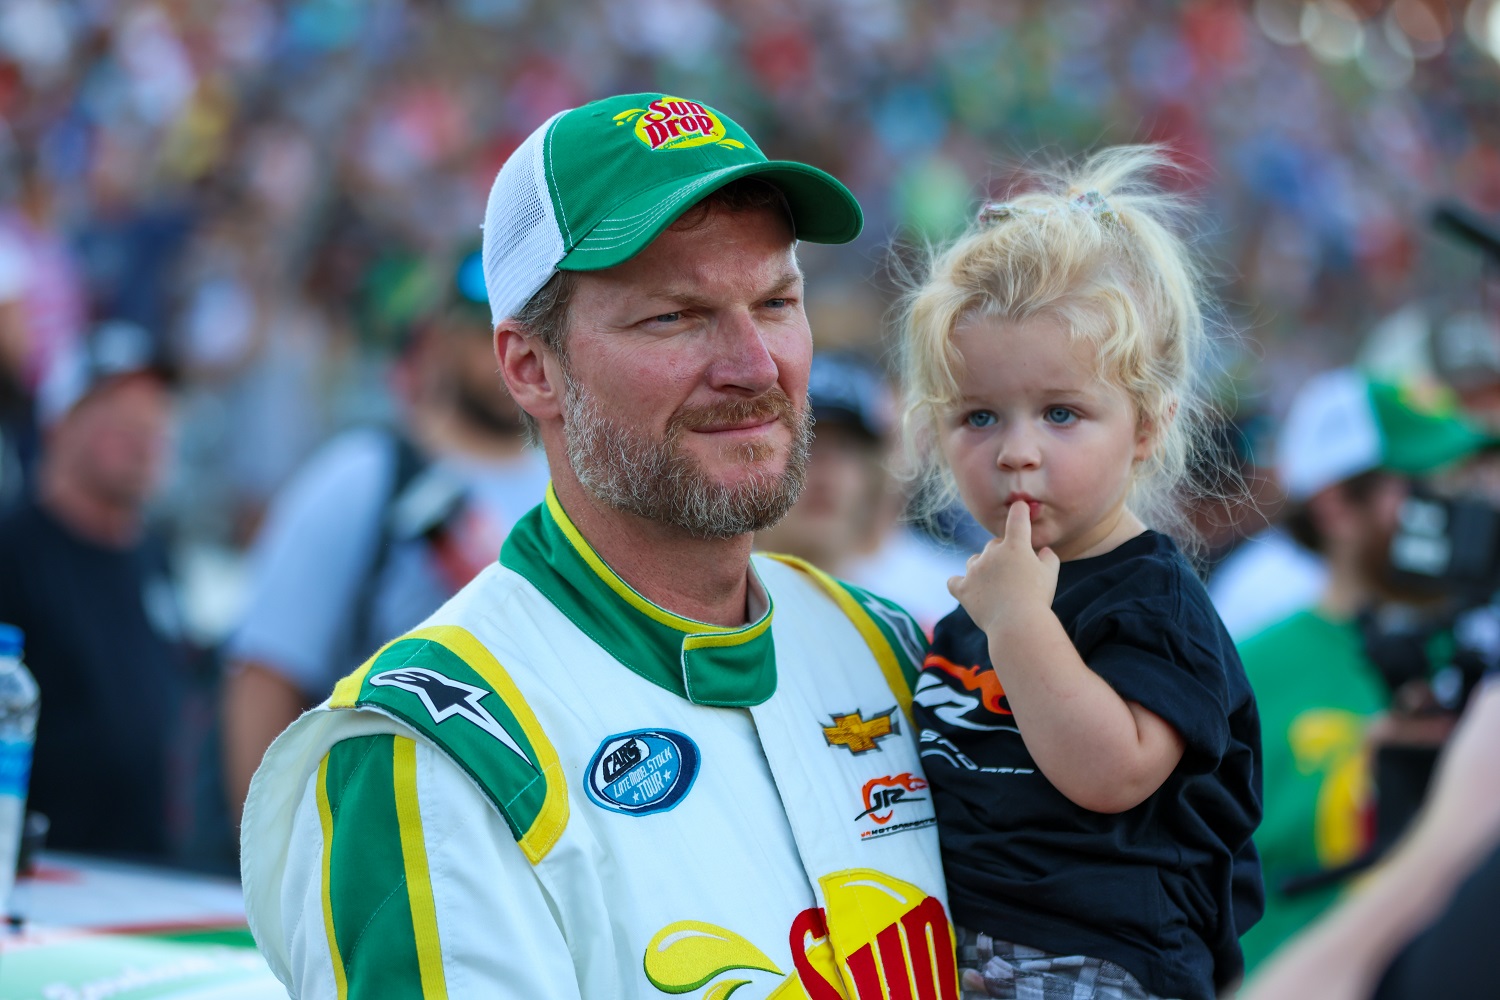 Dale Earnhardt Jr. spends time with his daughter just before the Cars Tour LMSC 125 on Aug 31, 2022, at the North Wilkesboro Speedway. | David Jensen/Icon Sportswire via Getty Images